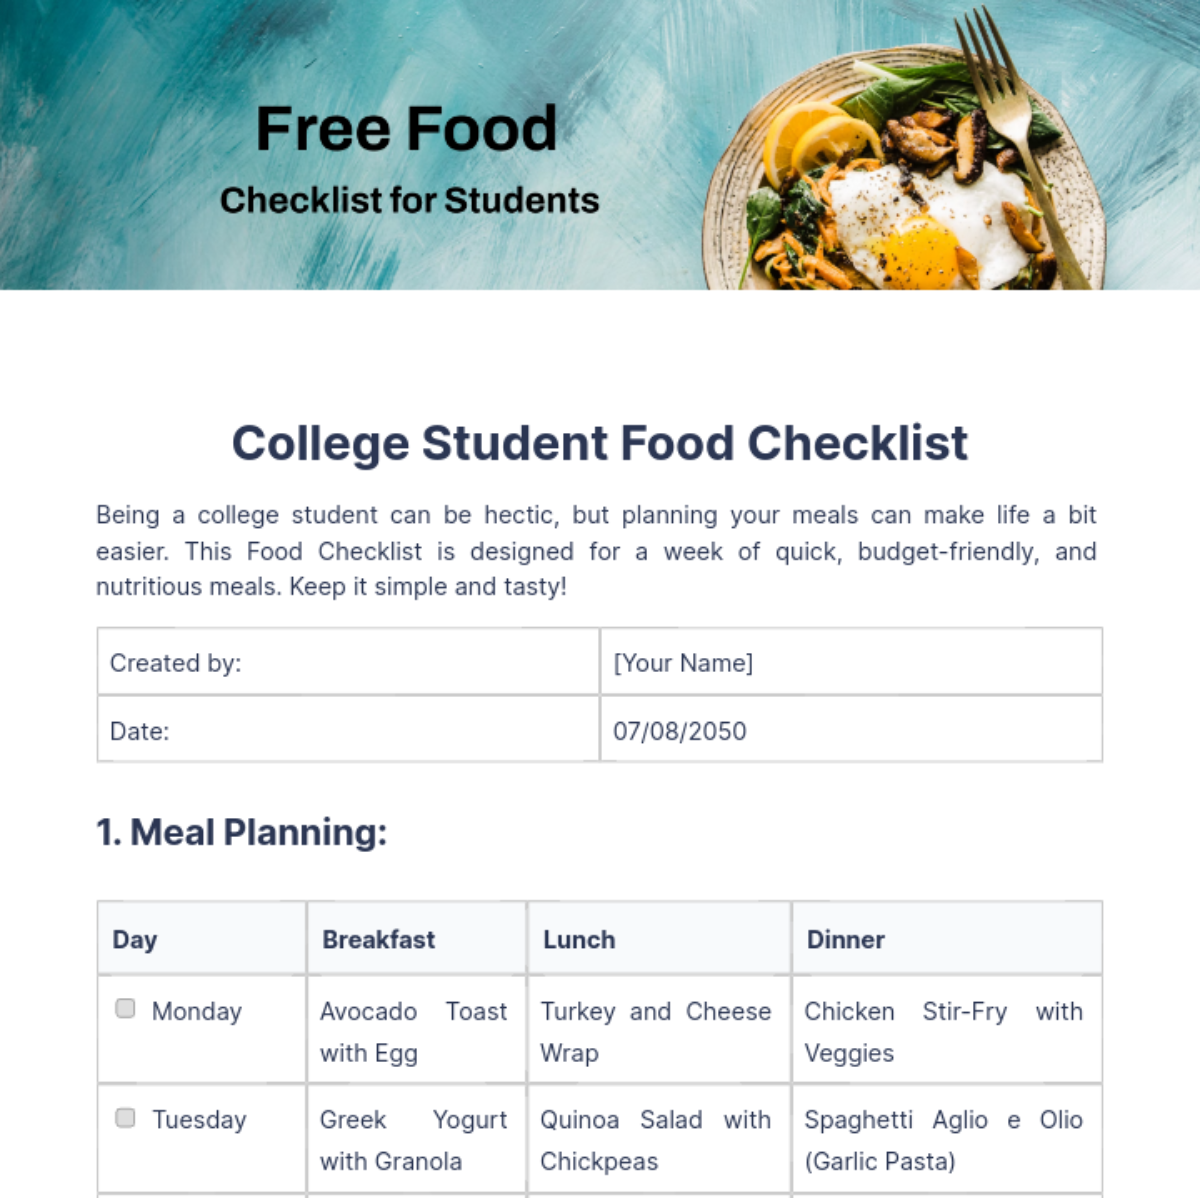 Free Food Checklist for Students Template